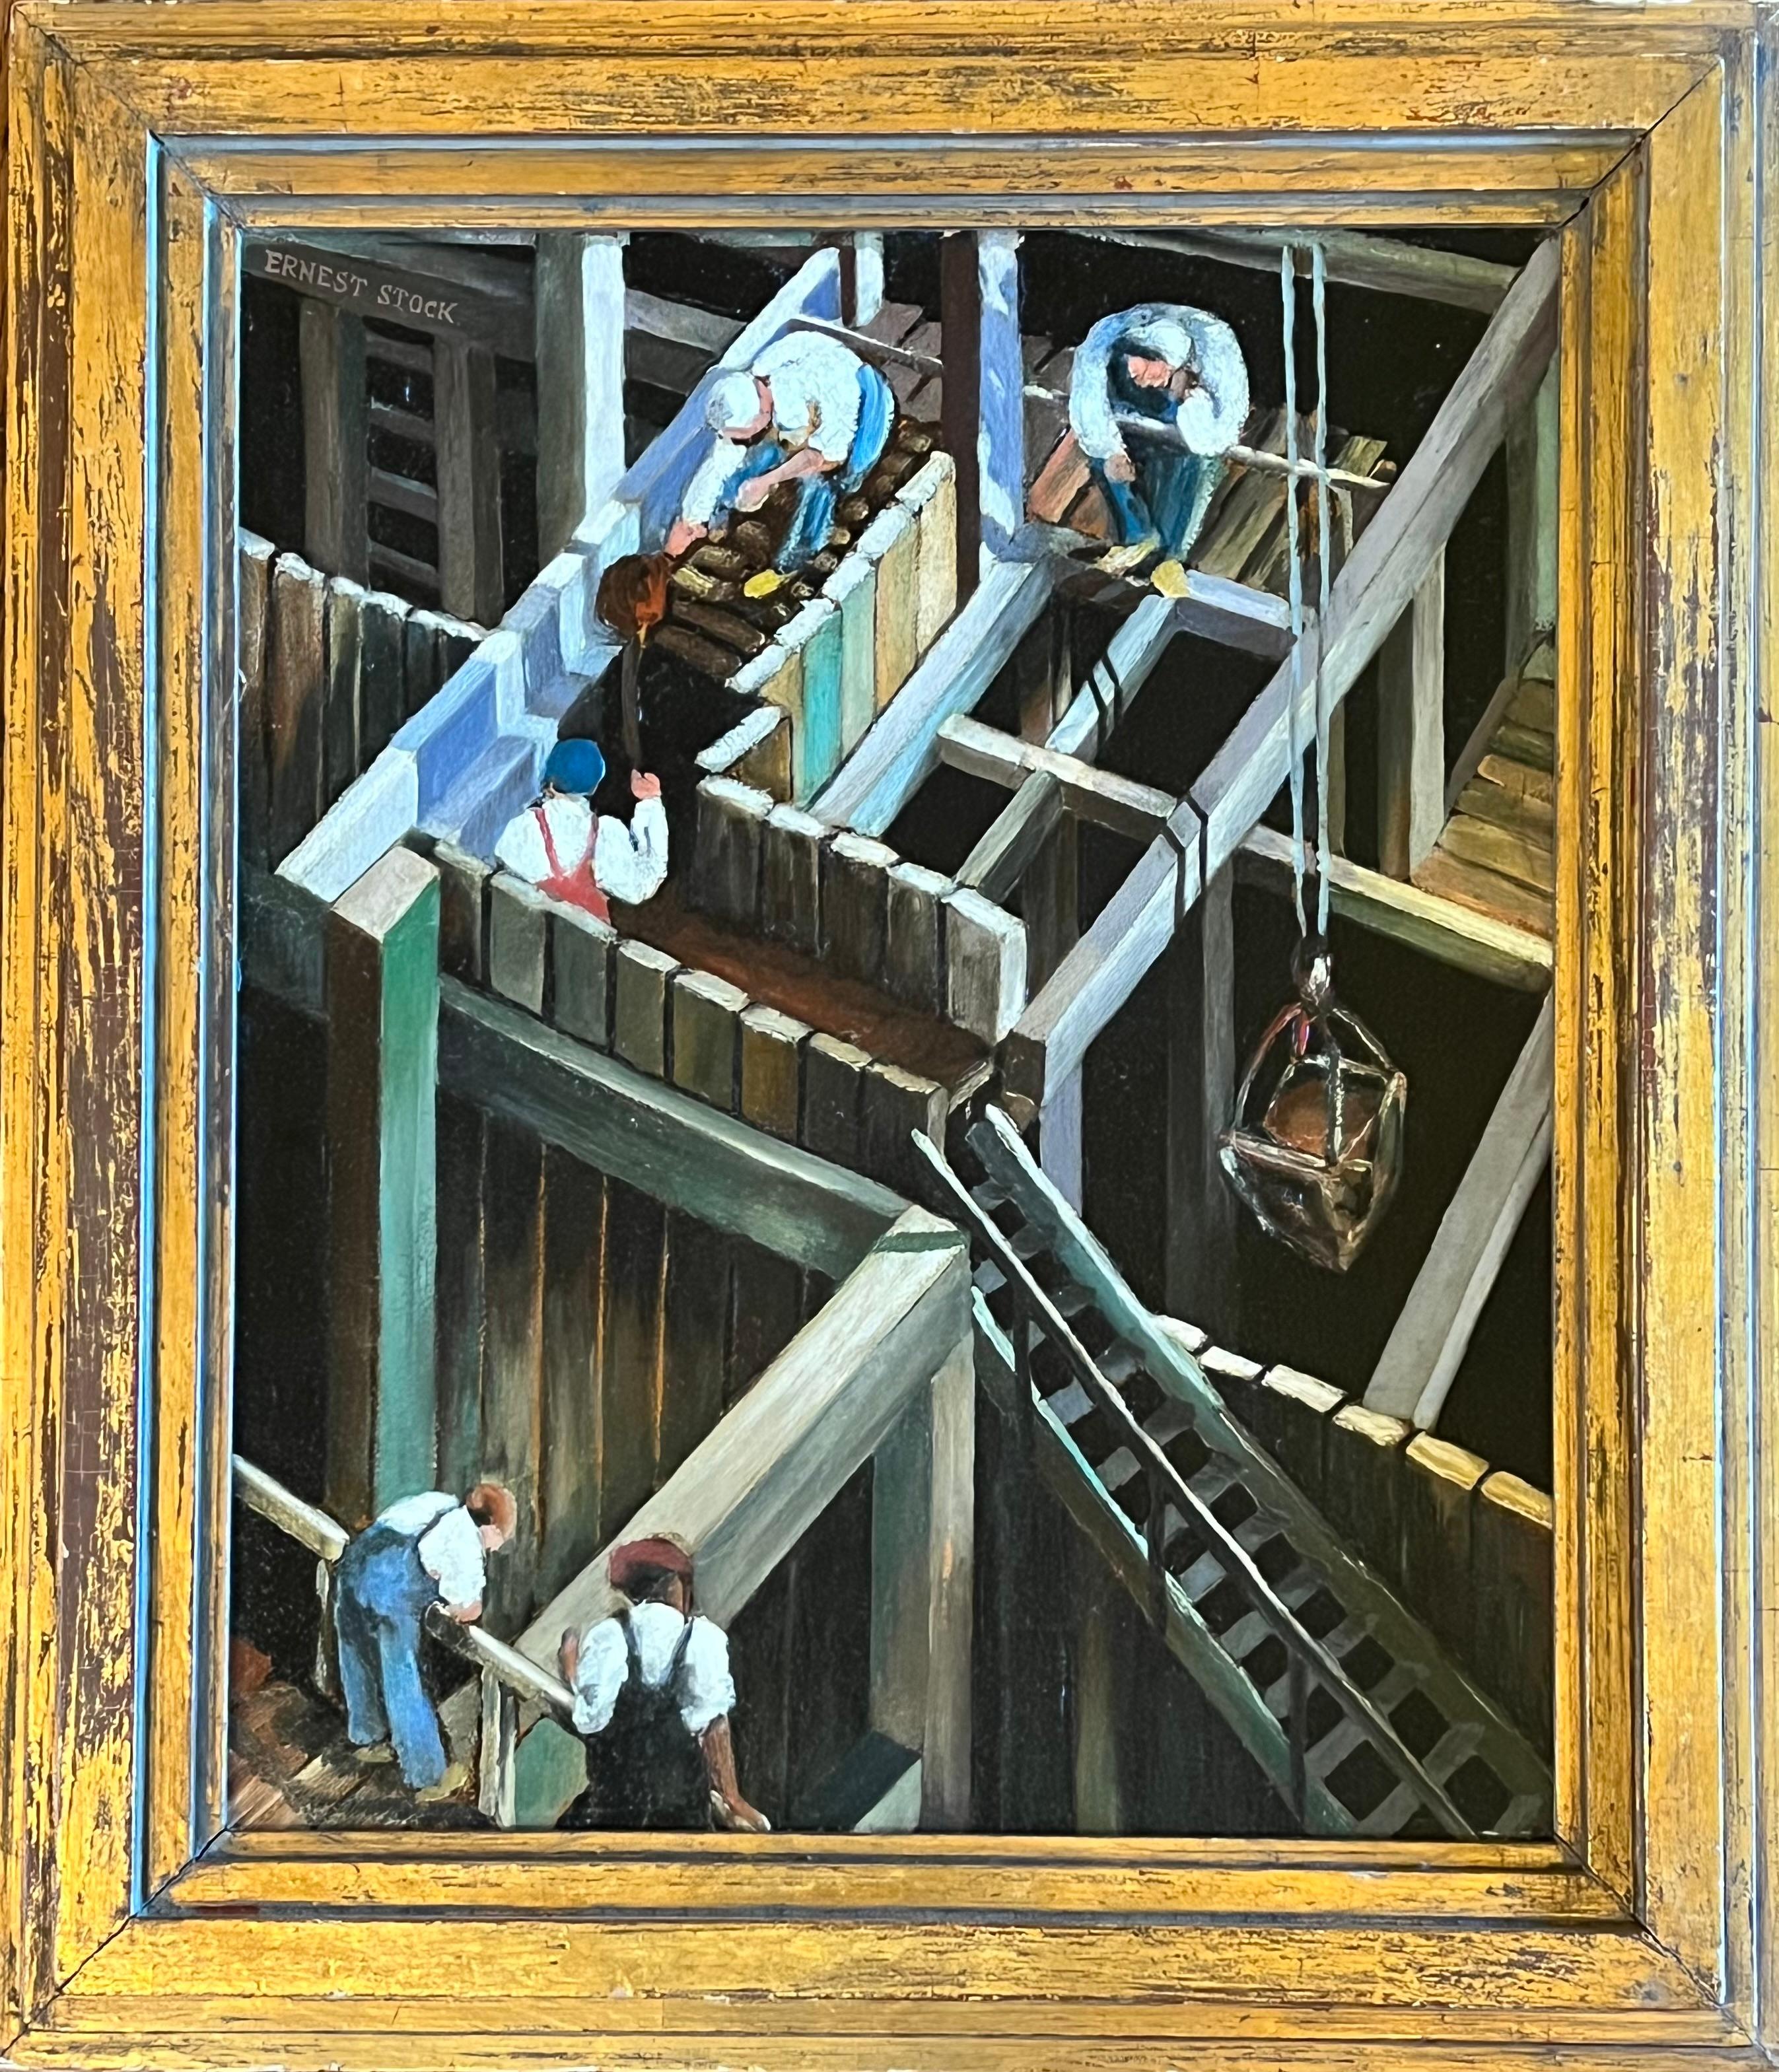 Subway Construction - Painting by Ernest Stock